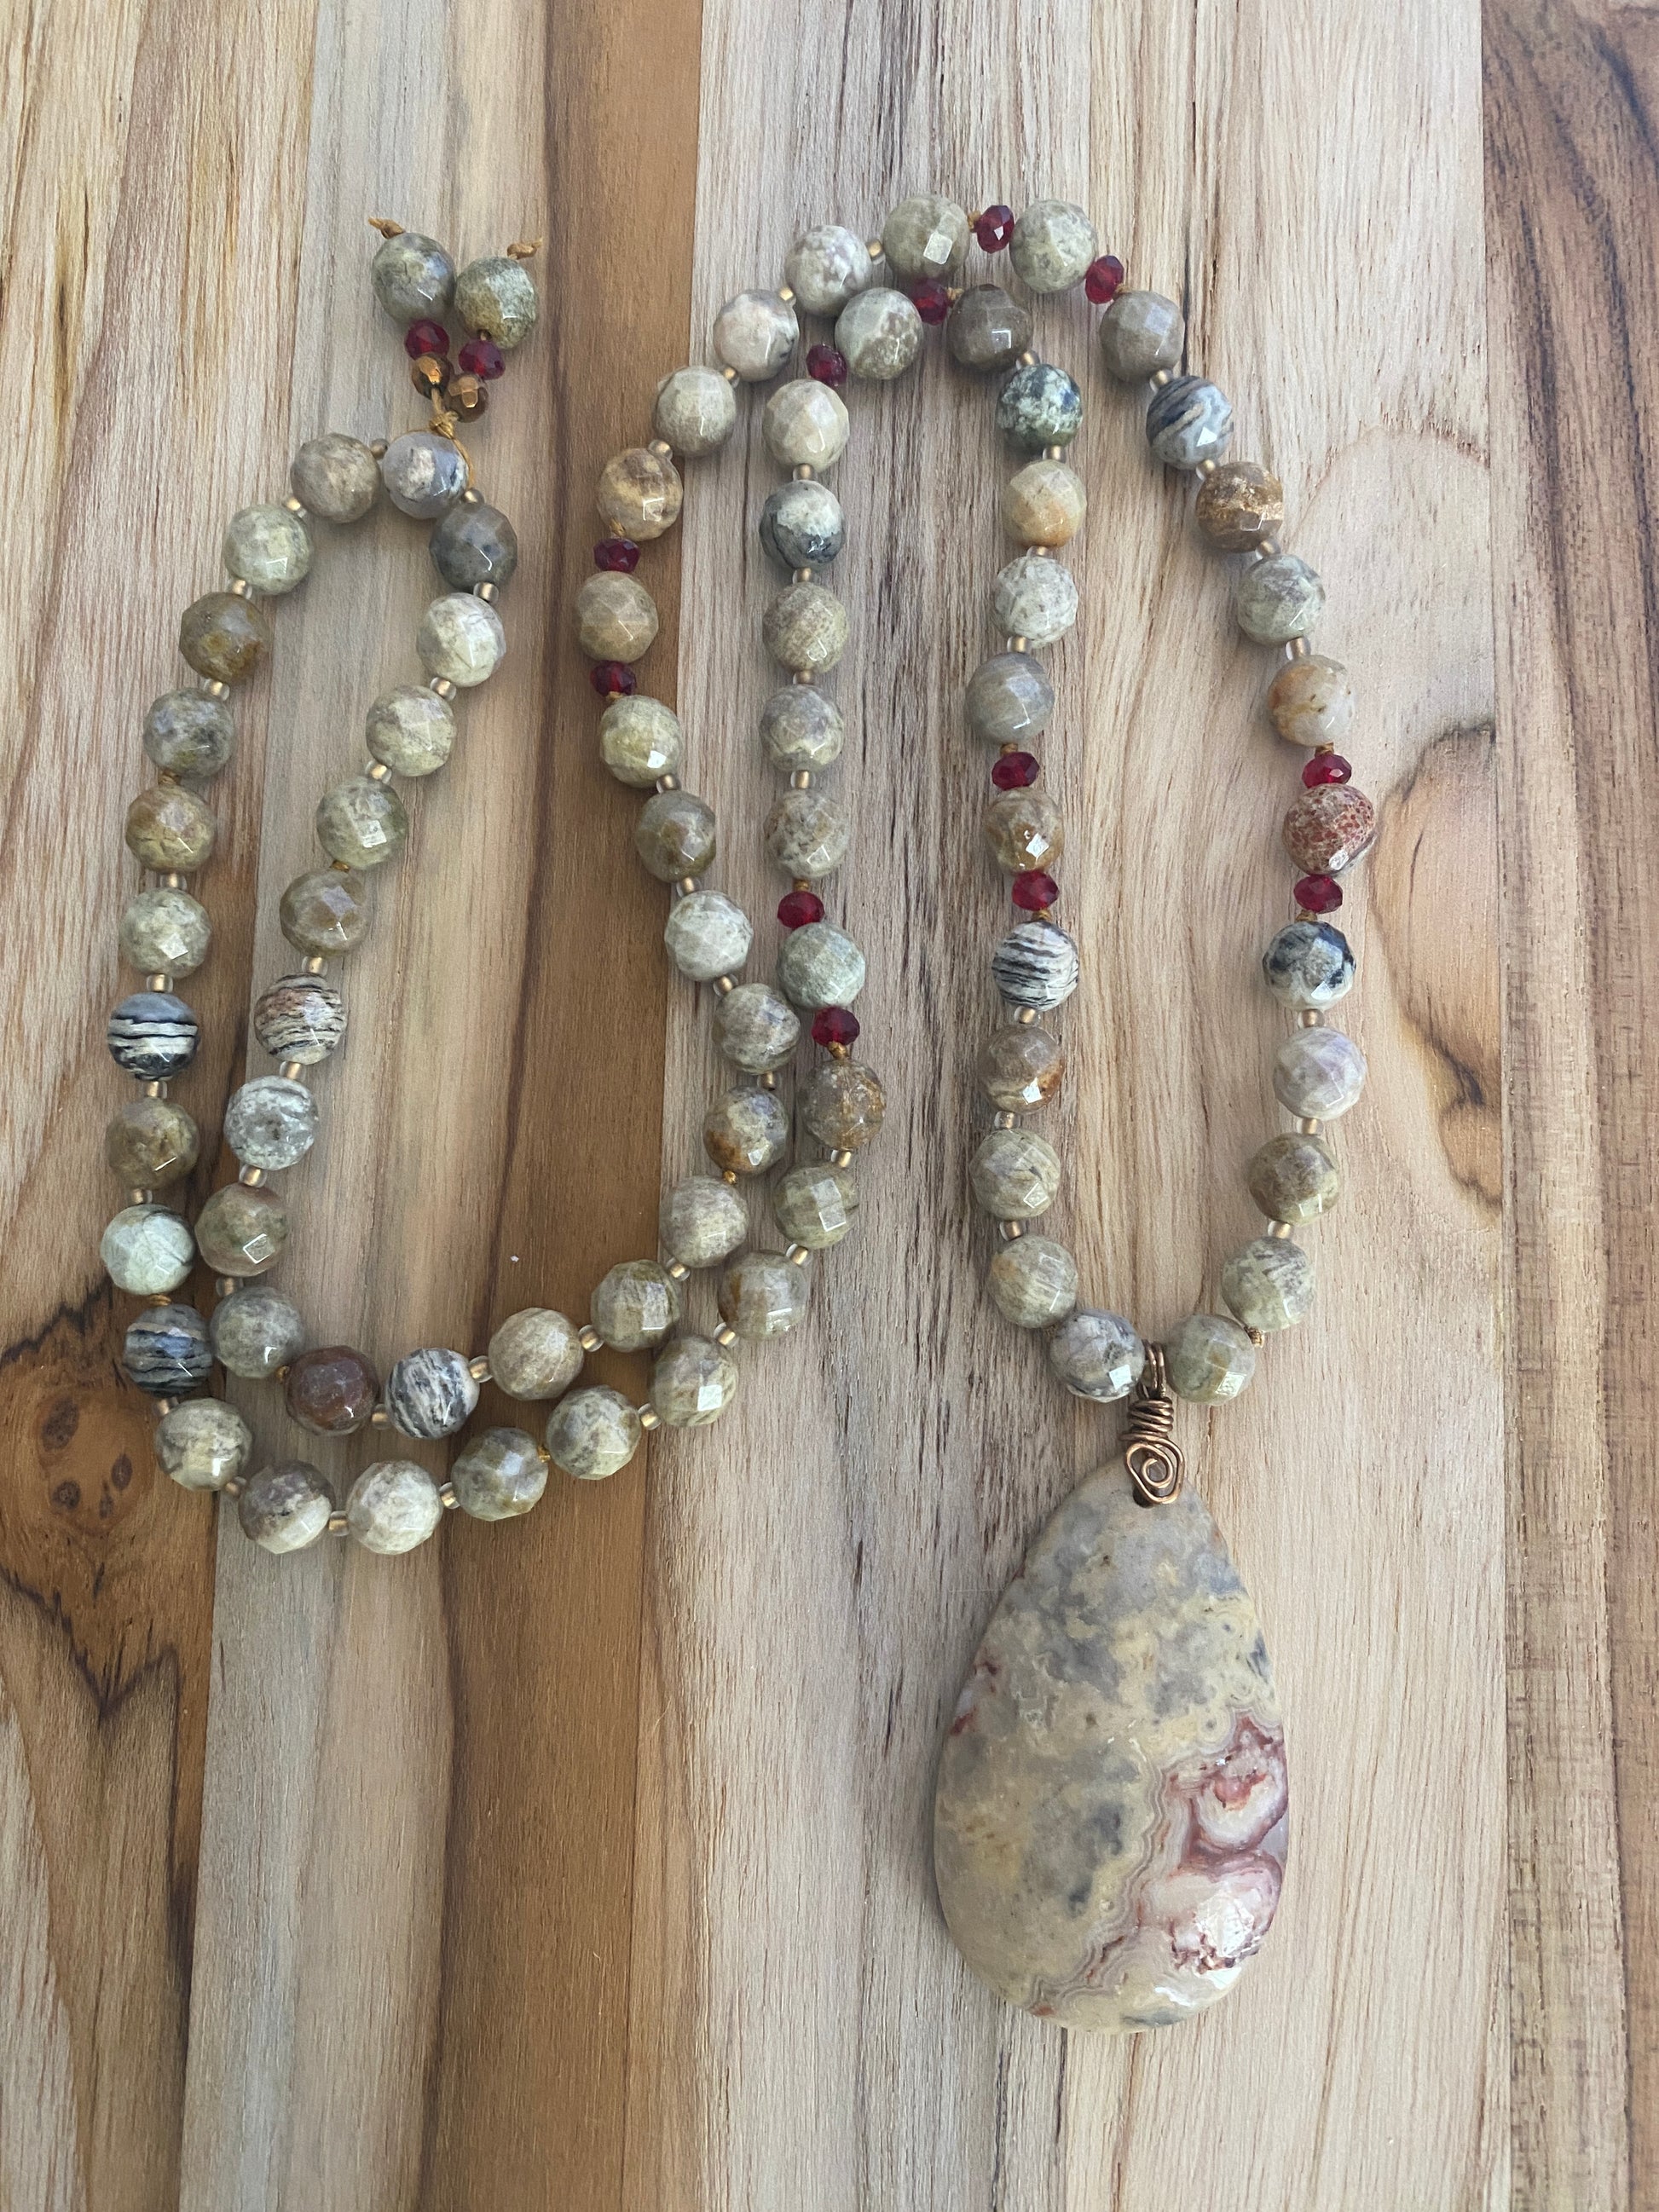 28" Long Beaded Crazy Lace Agate Pendant Necklace with Faceted Agate & Crystal Beads - My Urban Gems